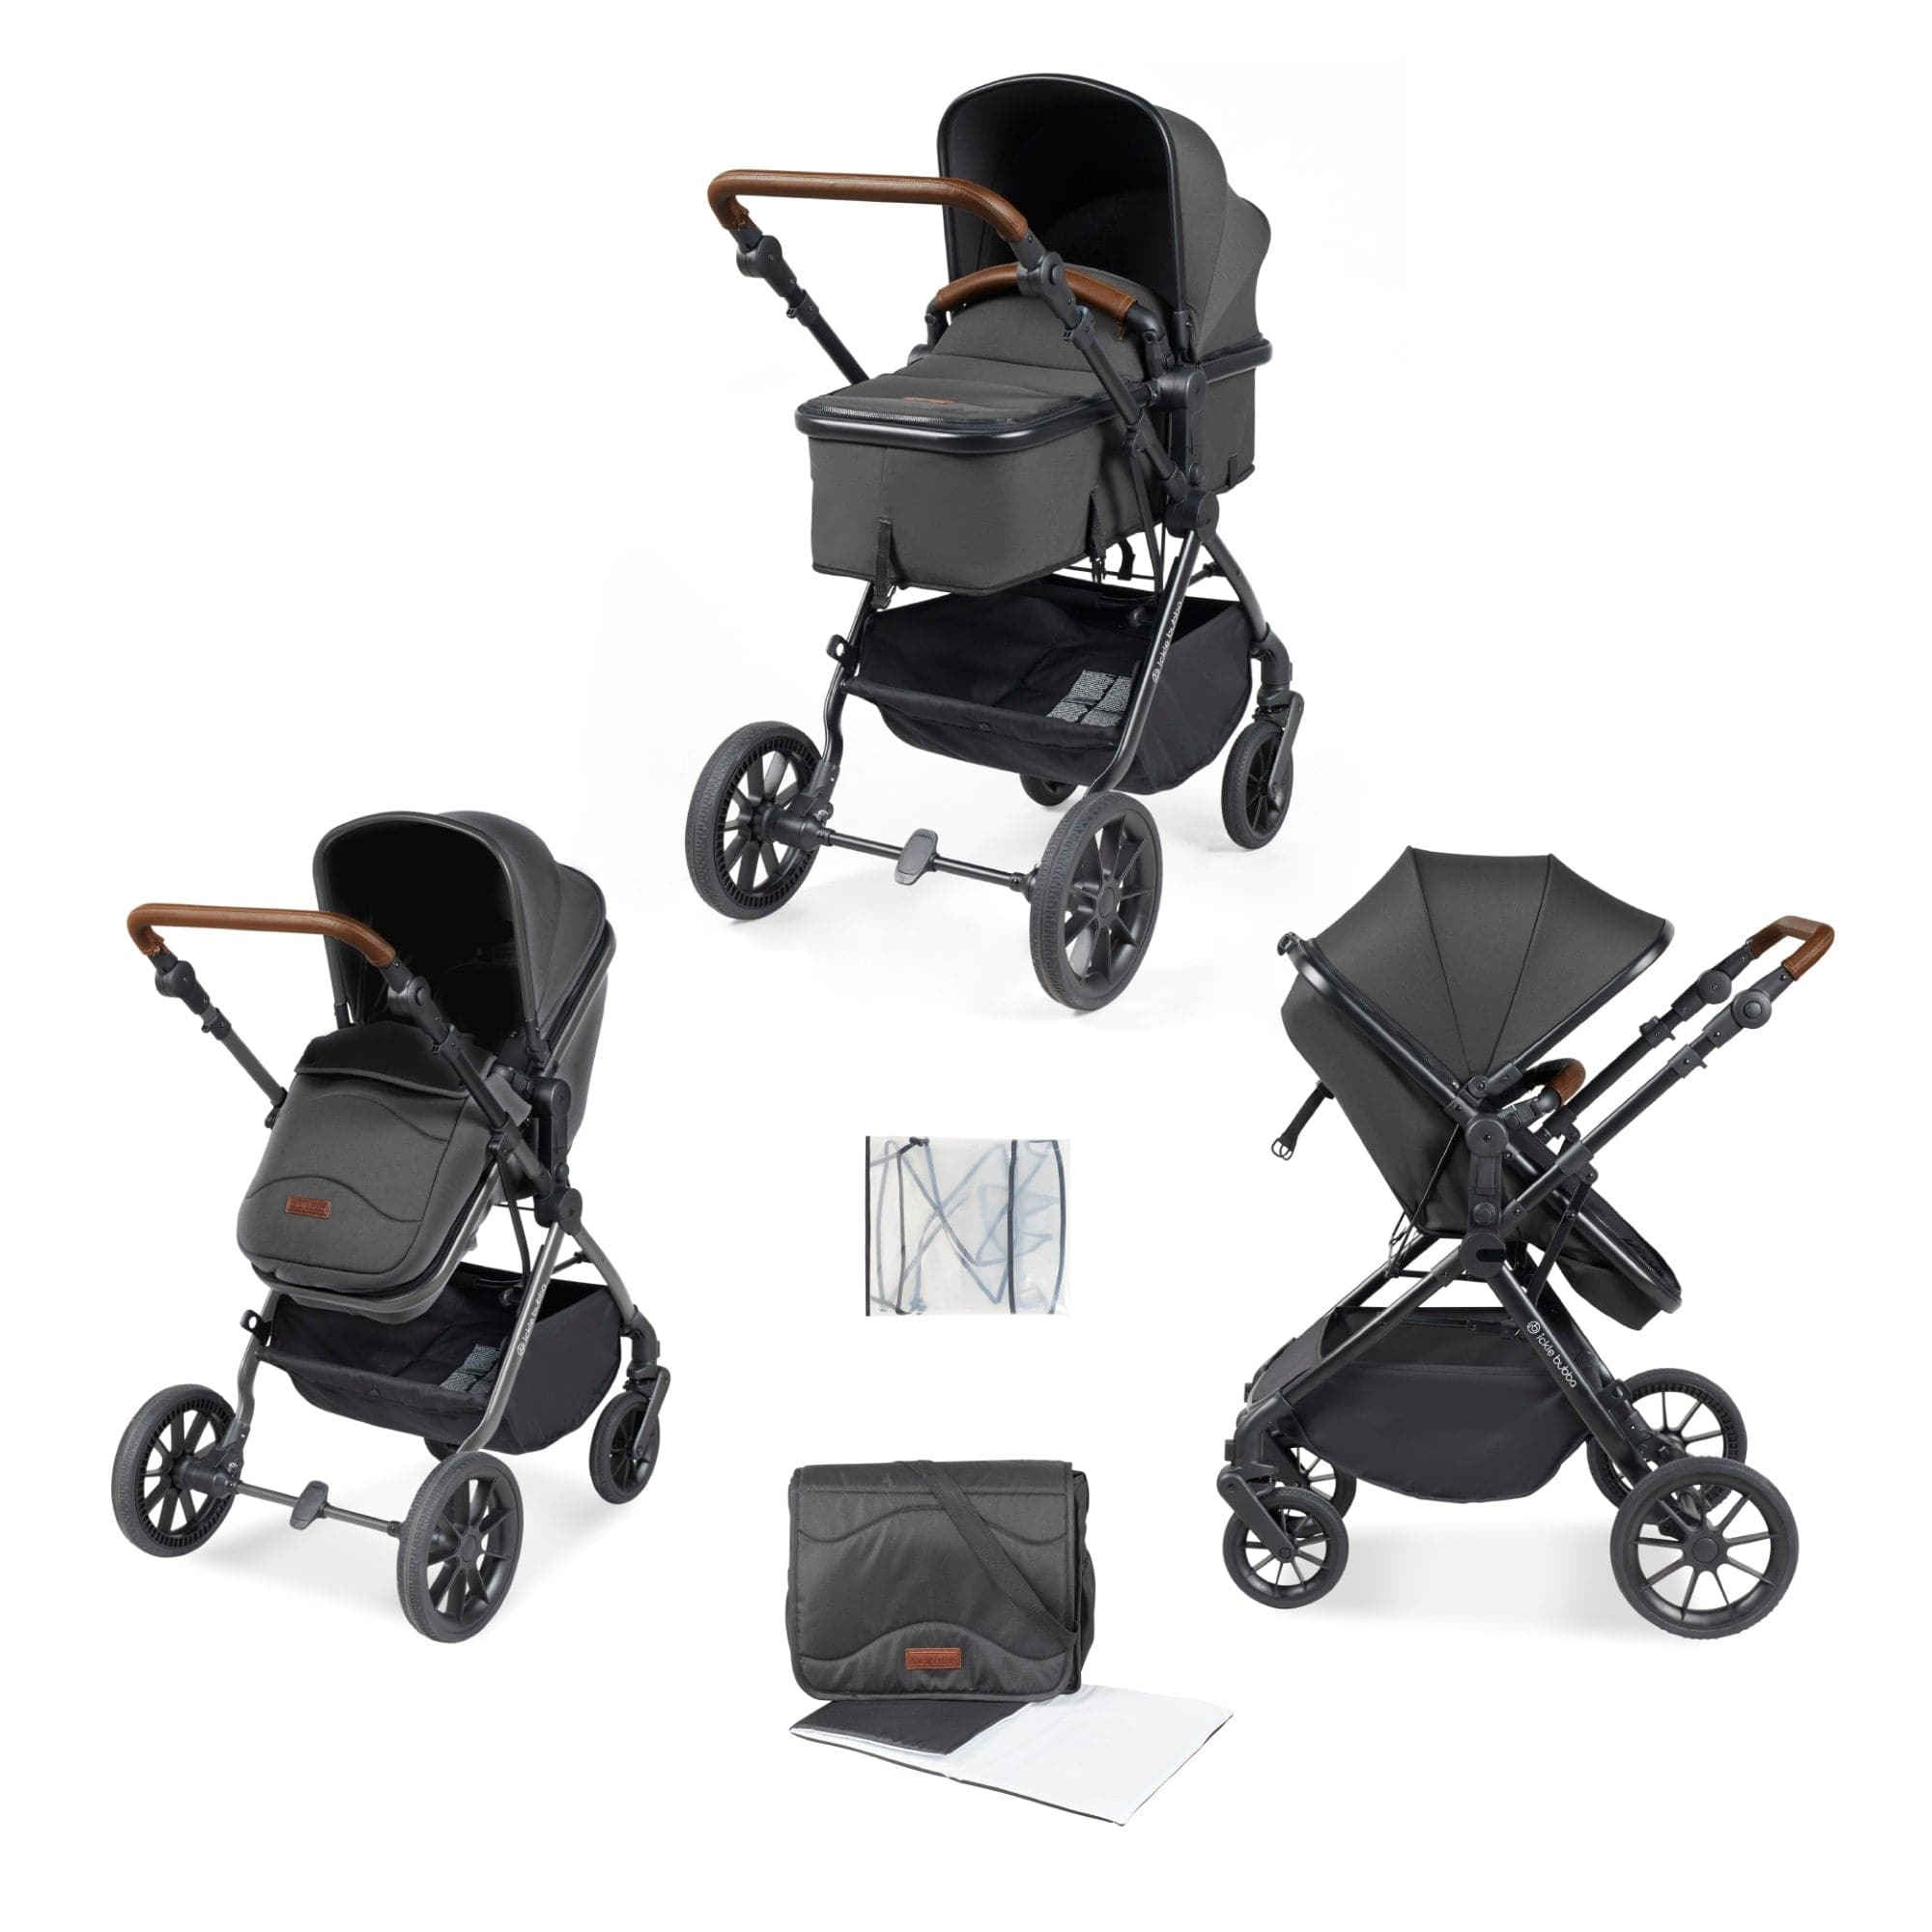 Ickle Bubba Cosmo 2 in 1 Plus Pushchair - Graphite Grey - For Your Little One